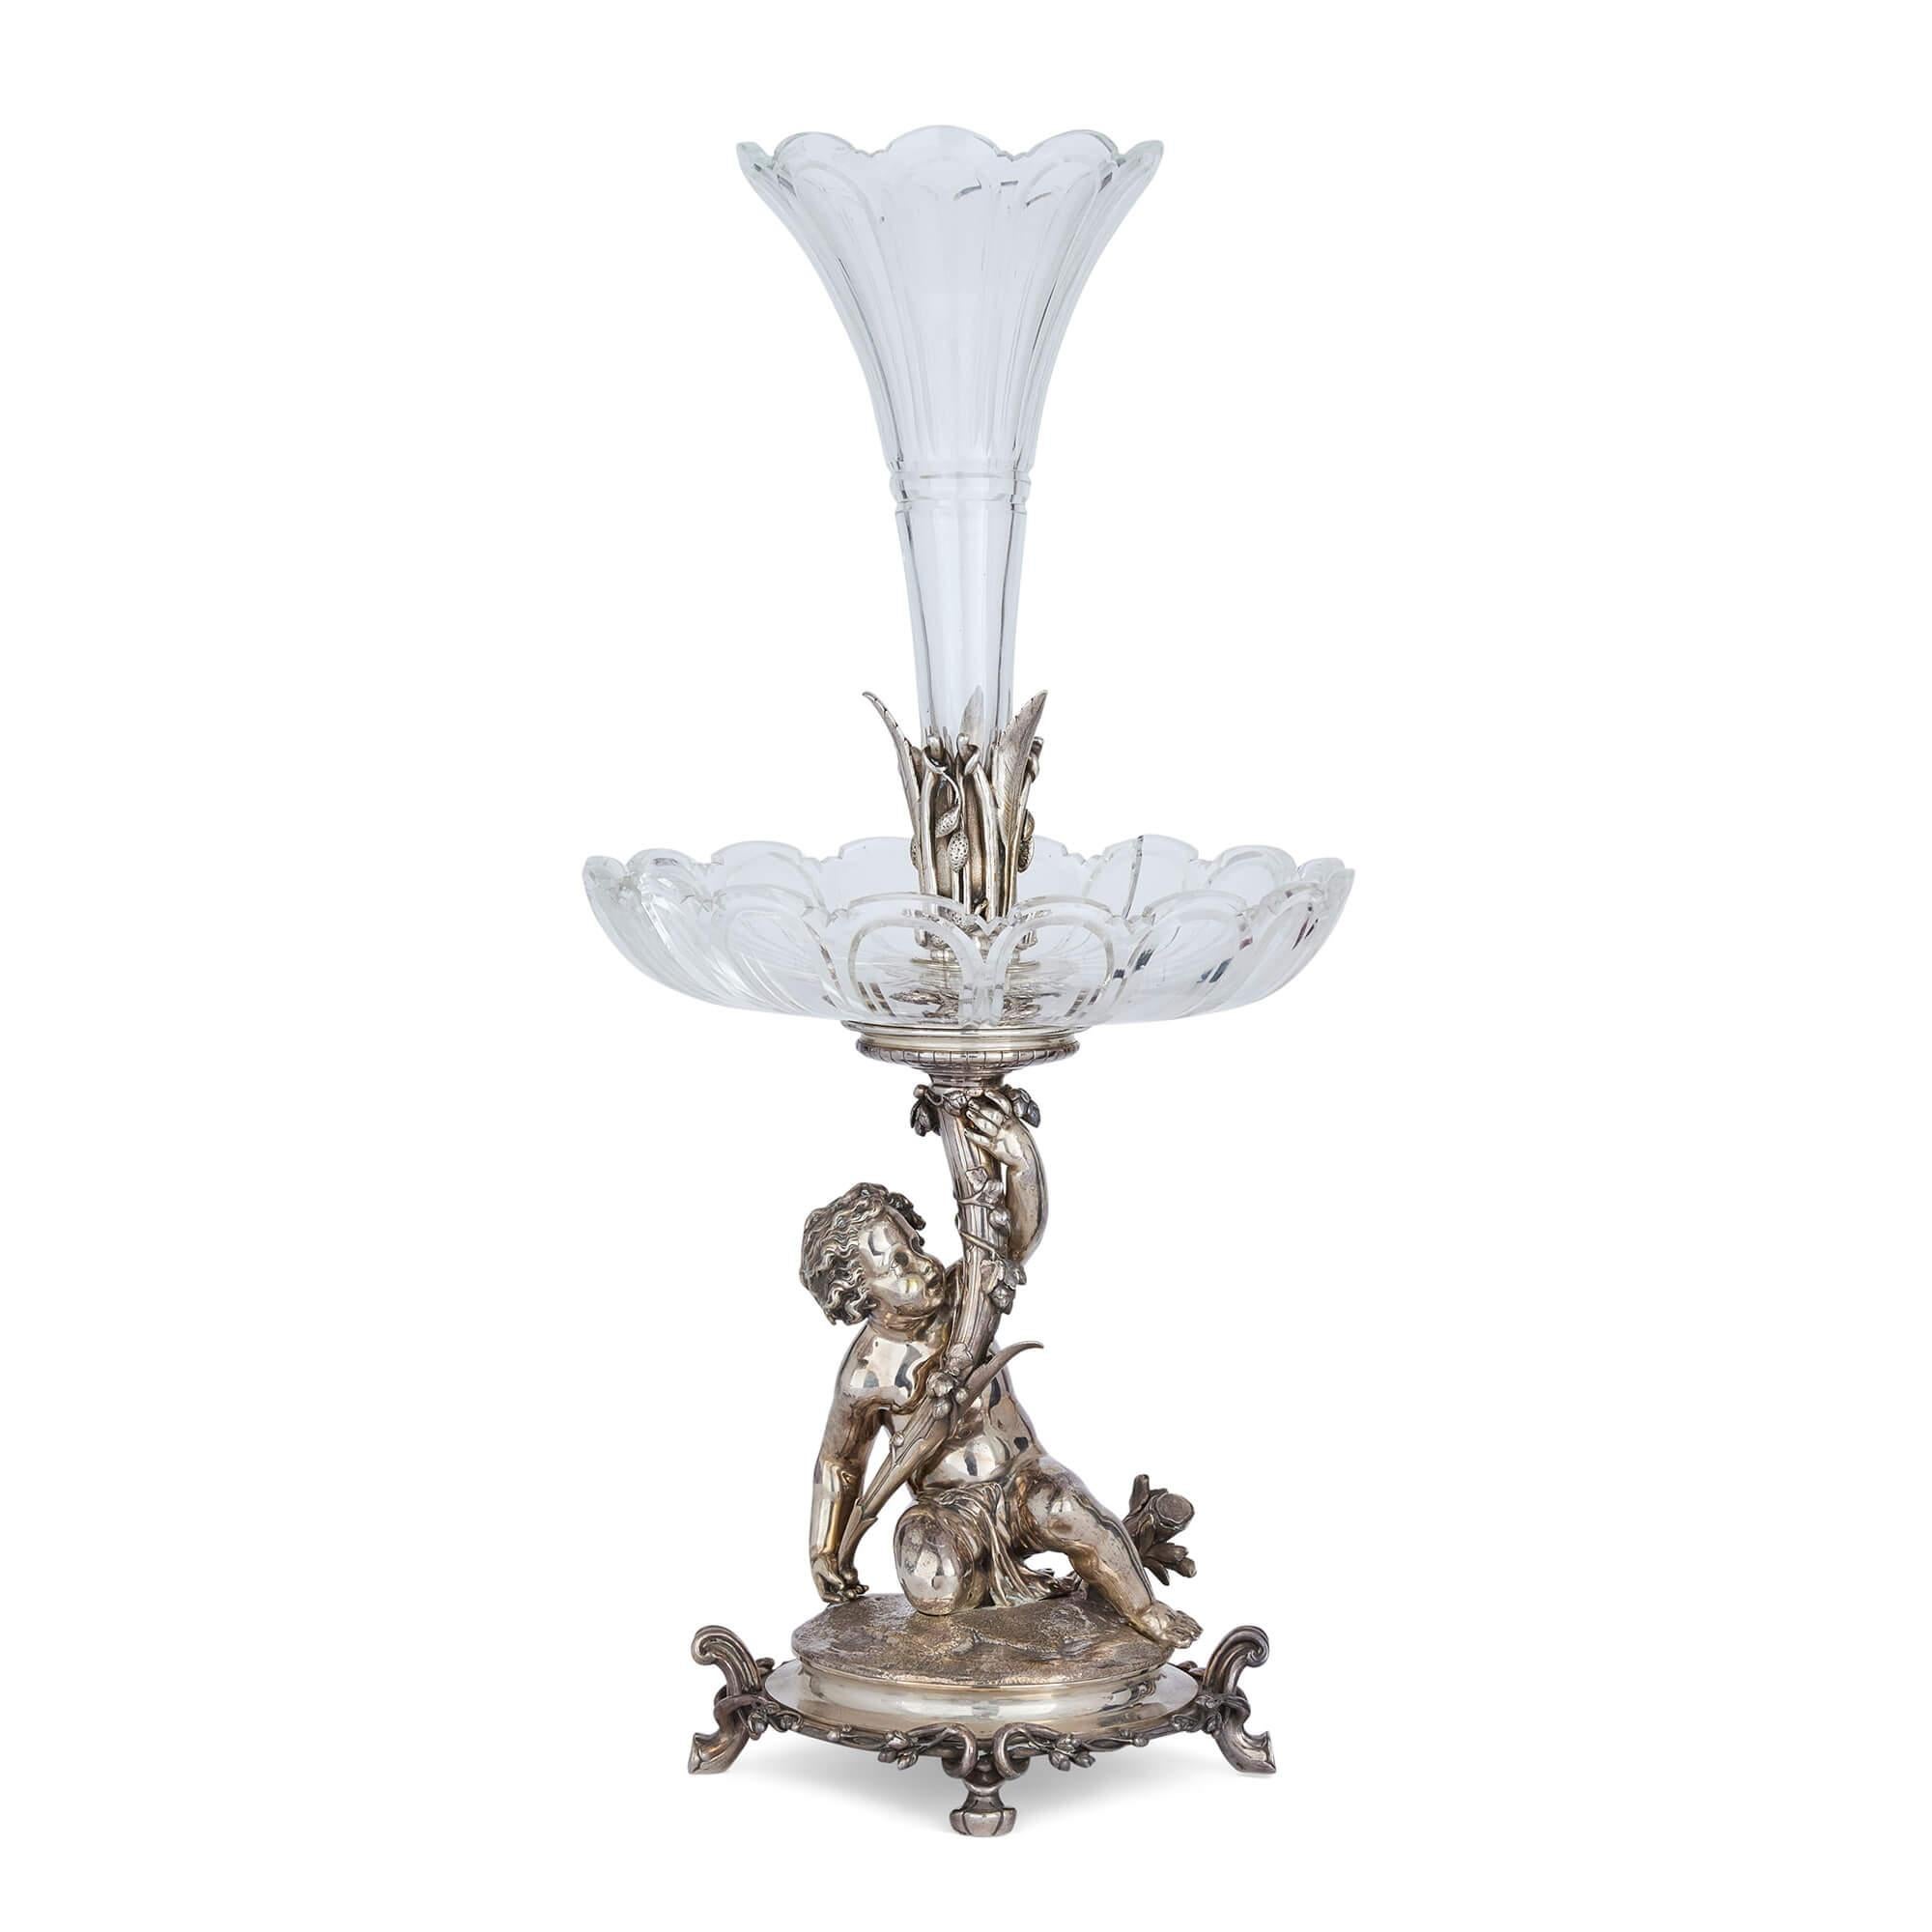 Pair of Christofle silvered bronze and cut-glass epergnes
French, 19th Century 
Height 61cm, diameter 28cm

This exquisite decorative pair is by the French firm Christofle. Founded in 1830, the silverware manufactory is notable for introducing the